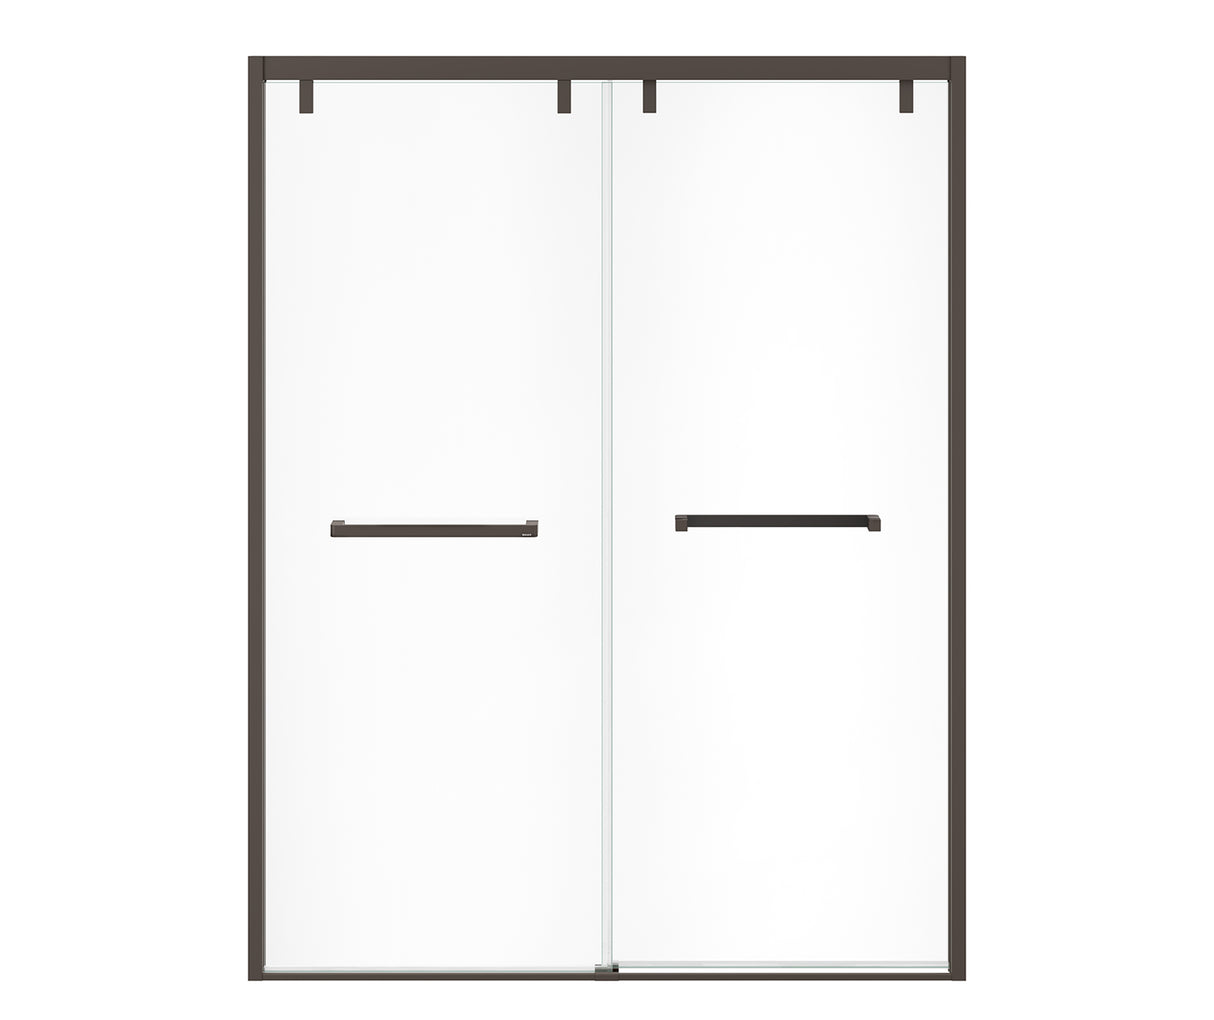 MAAX 135322-900-173-000 Uptown 56-59 x 76 in. 8 mm Bypass Shower Door for Alcove Installation with Clear glass in Dark Bronze